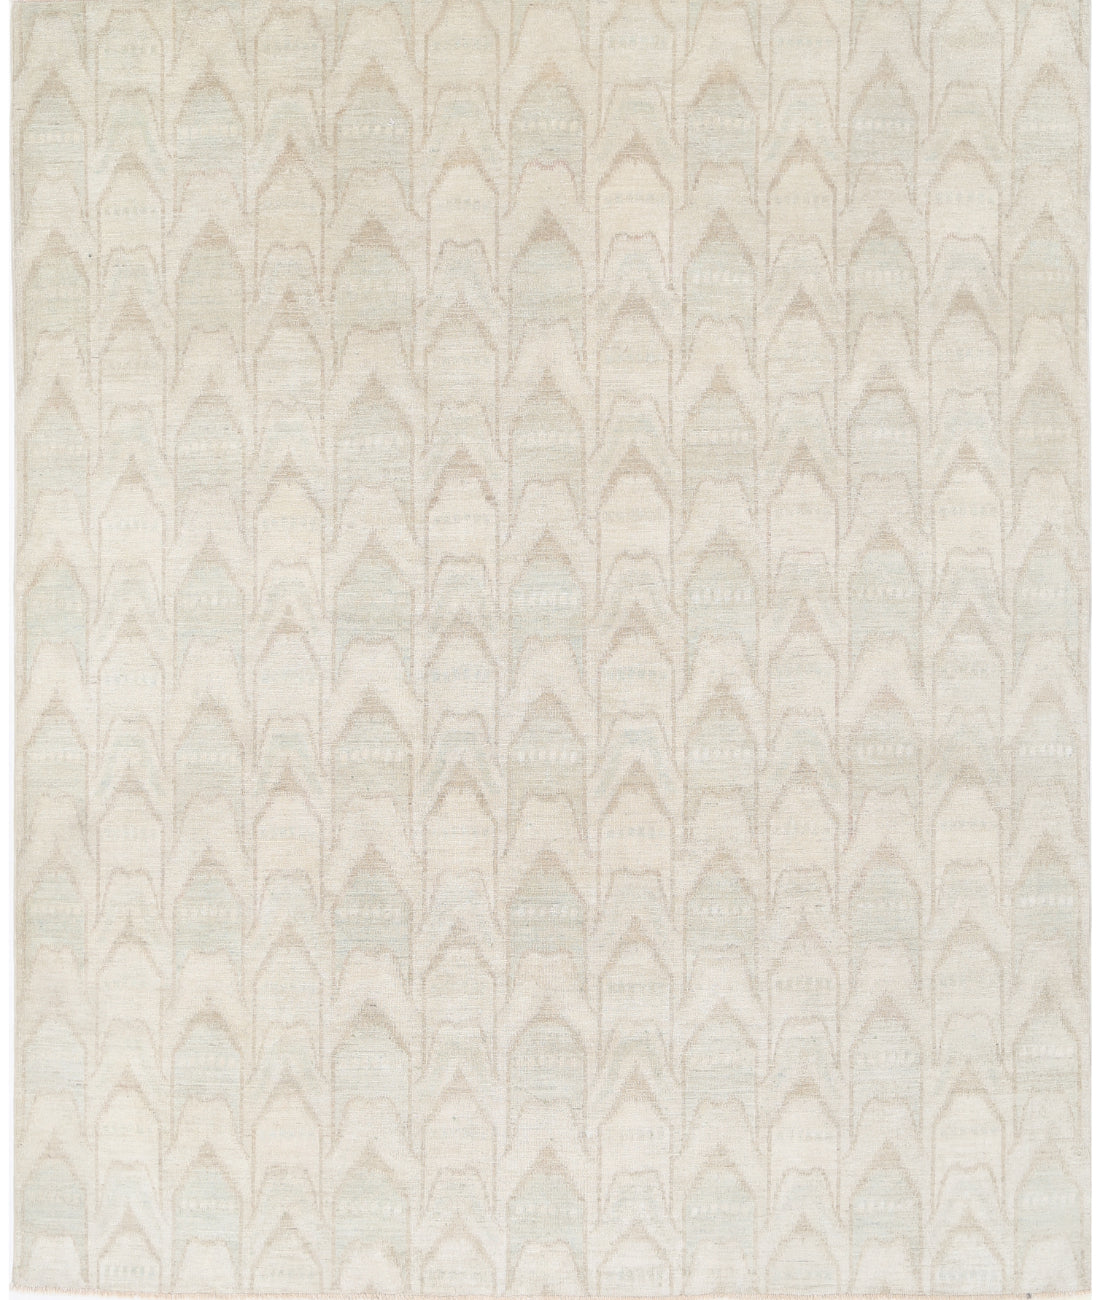 Hand Knotted Ikat Wool Rug - 7'9'' x 9'4'' 7'9'' x 9'4'' (233 X 280) / Ivory / Blue